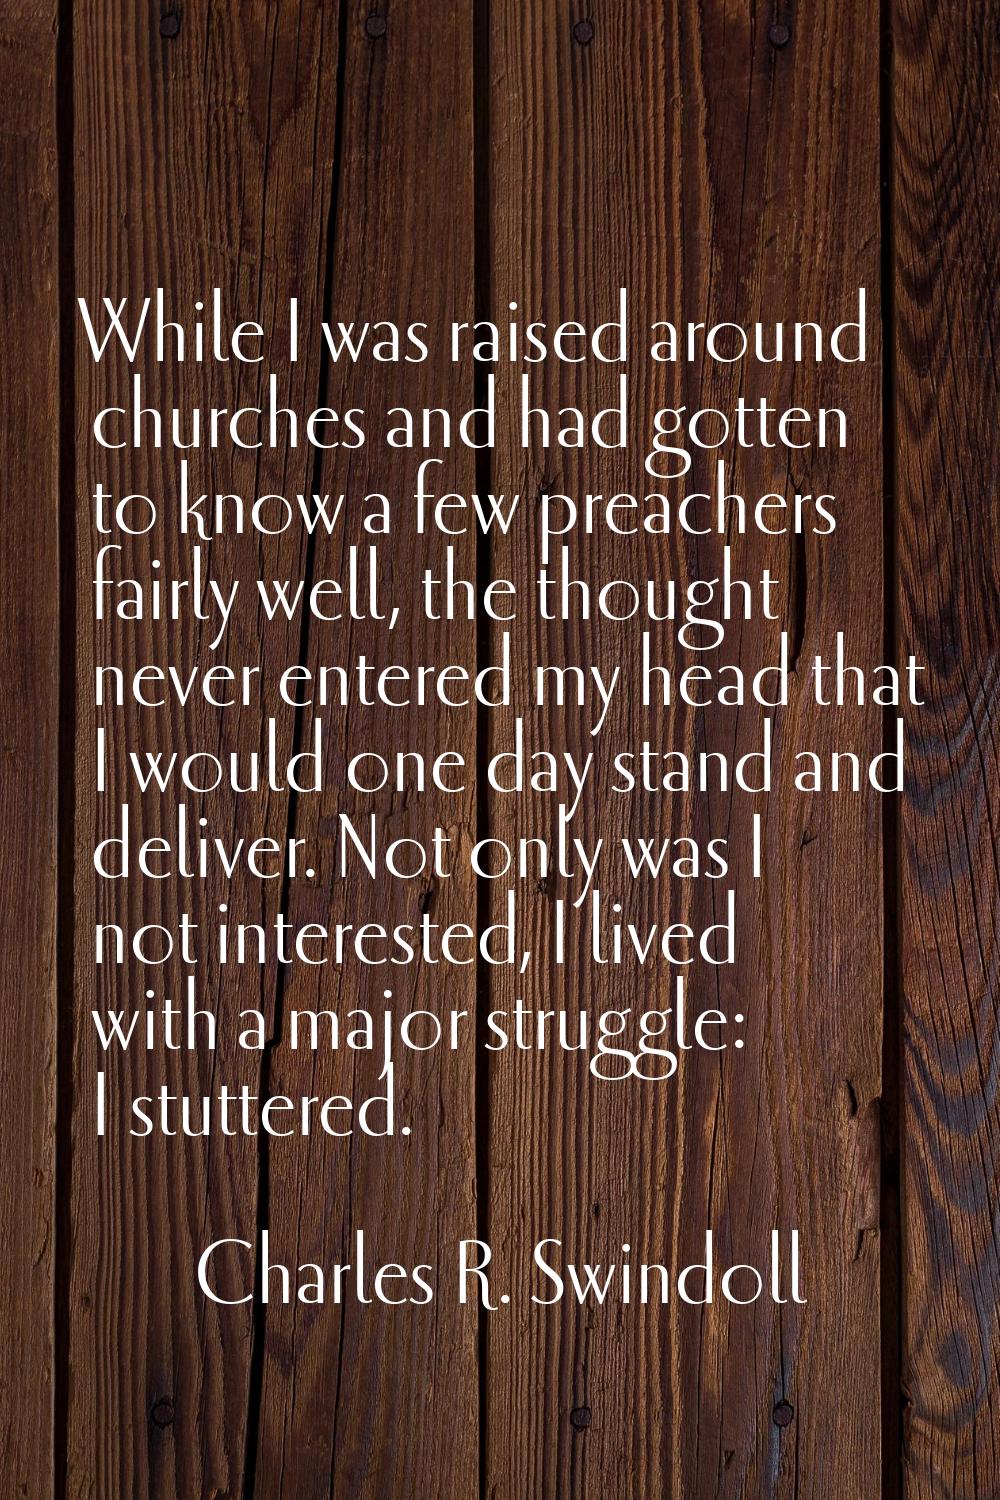 While I was raised around churches and had gotten to know a few preachers fairly well, the thought 